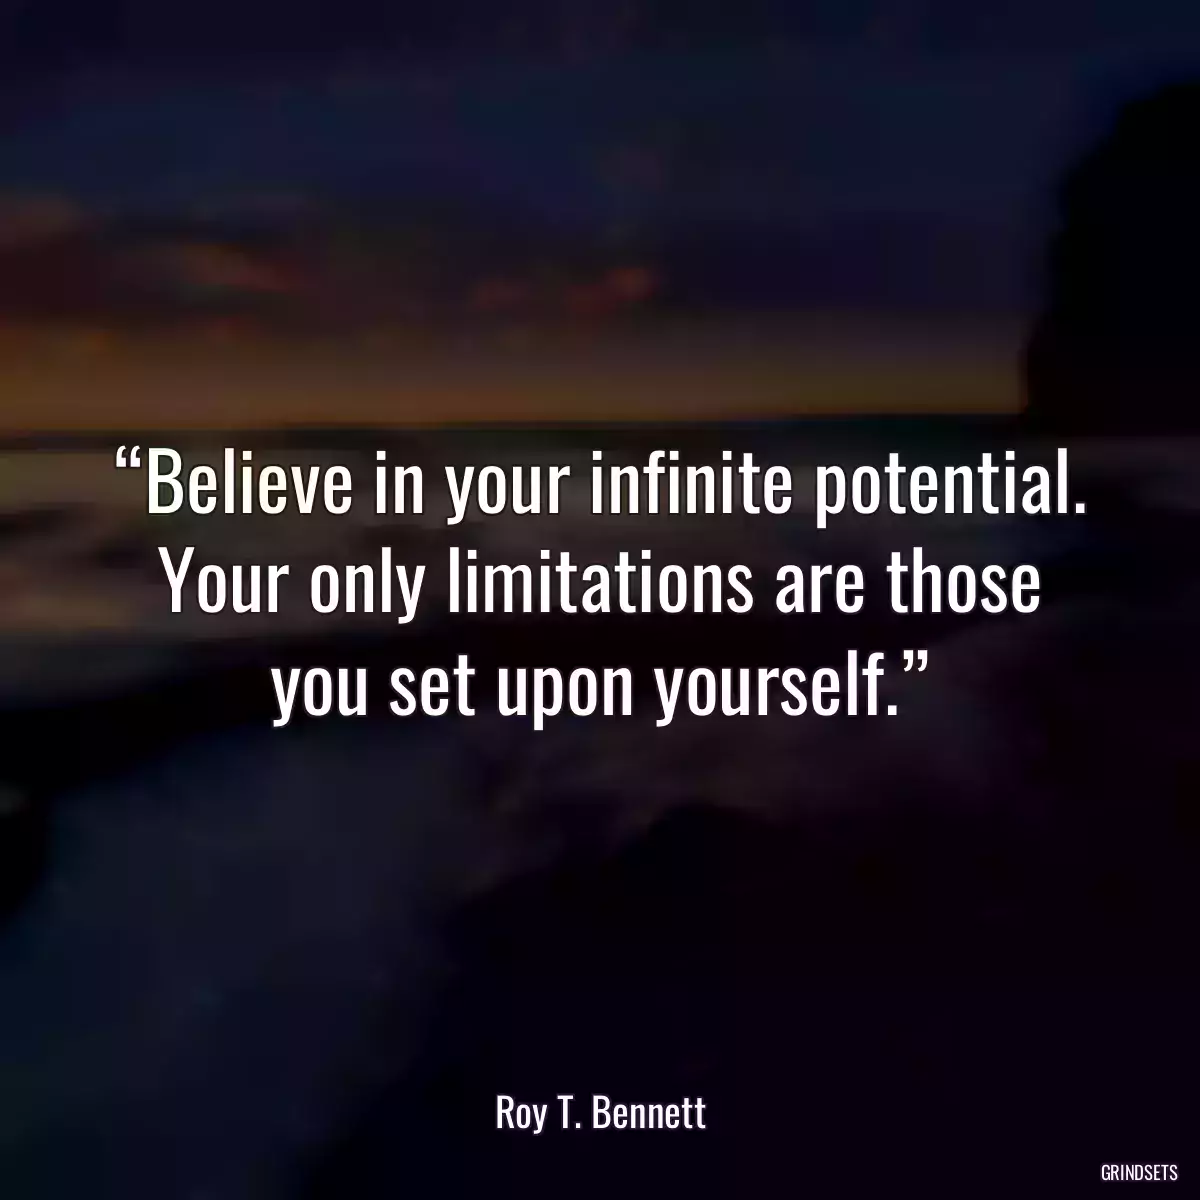 “Believe in your infinite potential. Your only limitations are those you set upon yourself.”